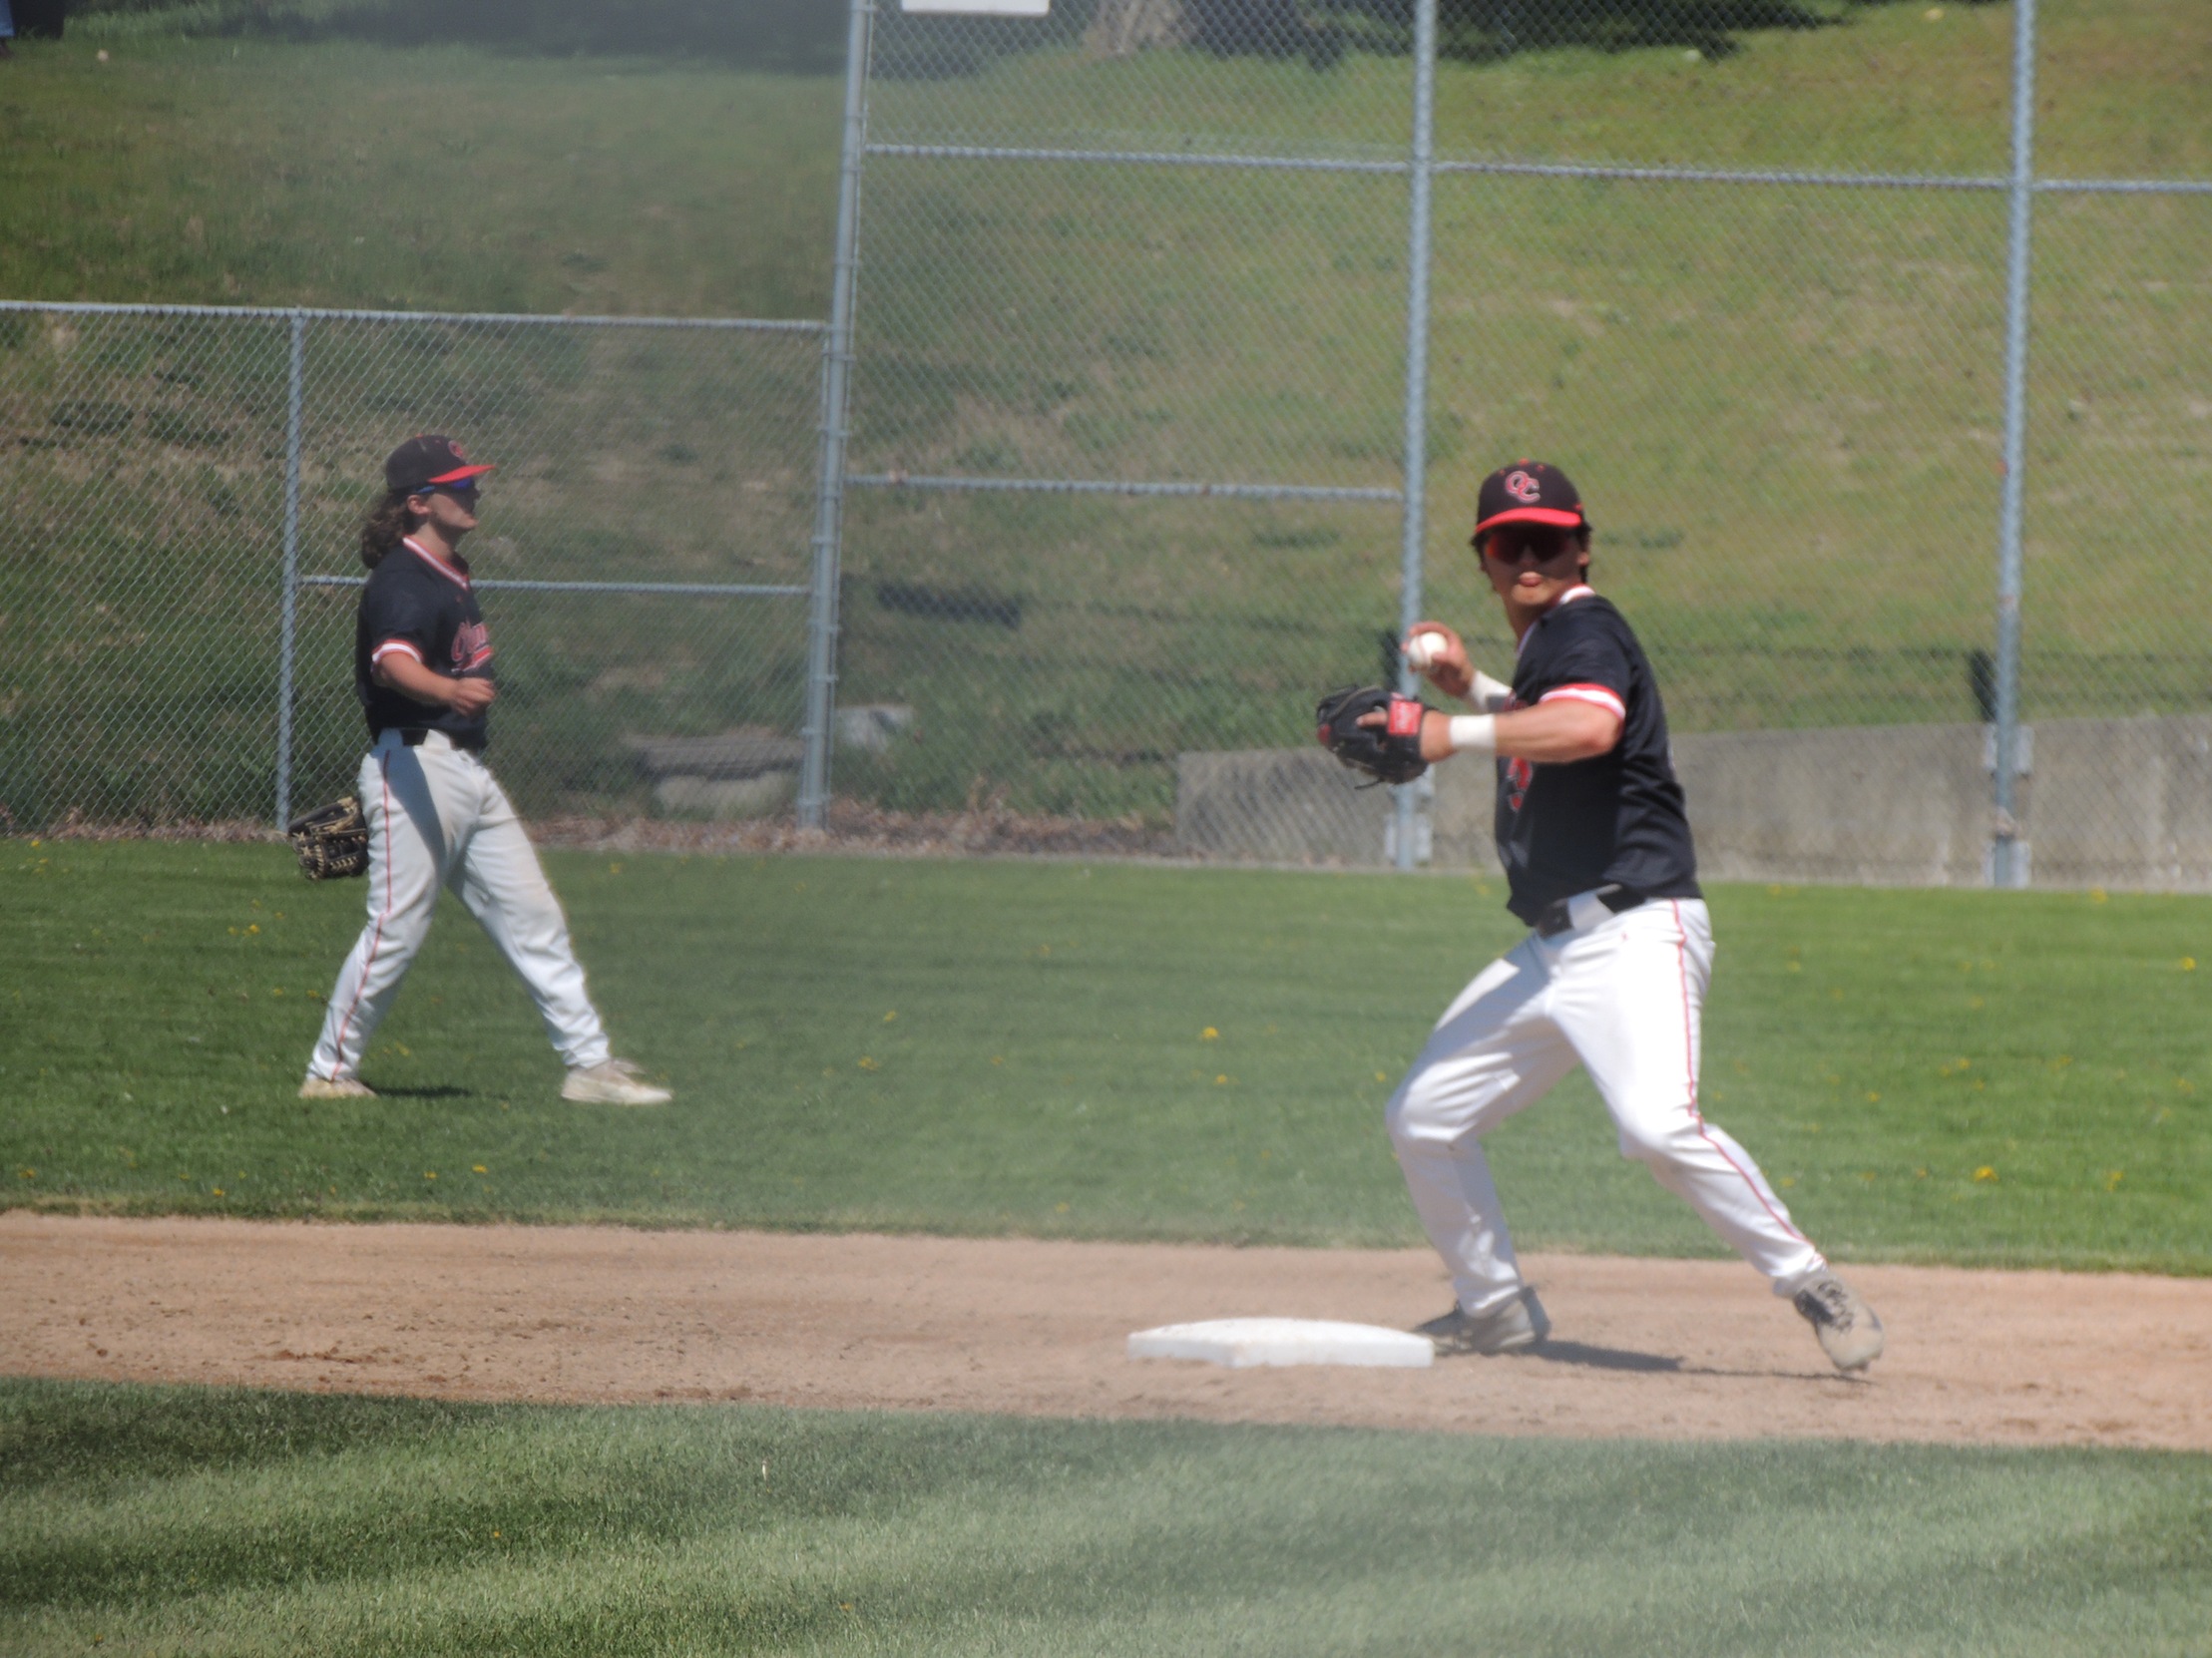 A second baseman throws the ball to first base during a game.